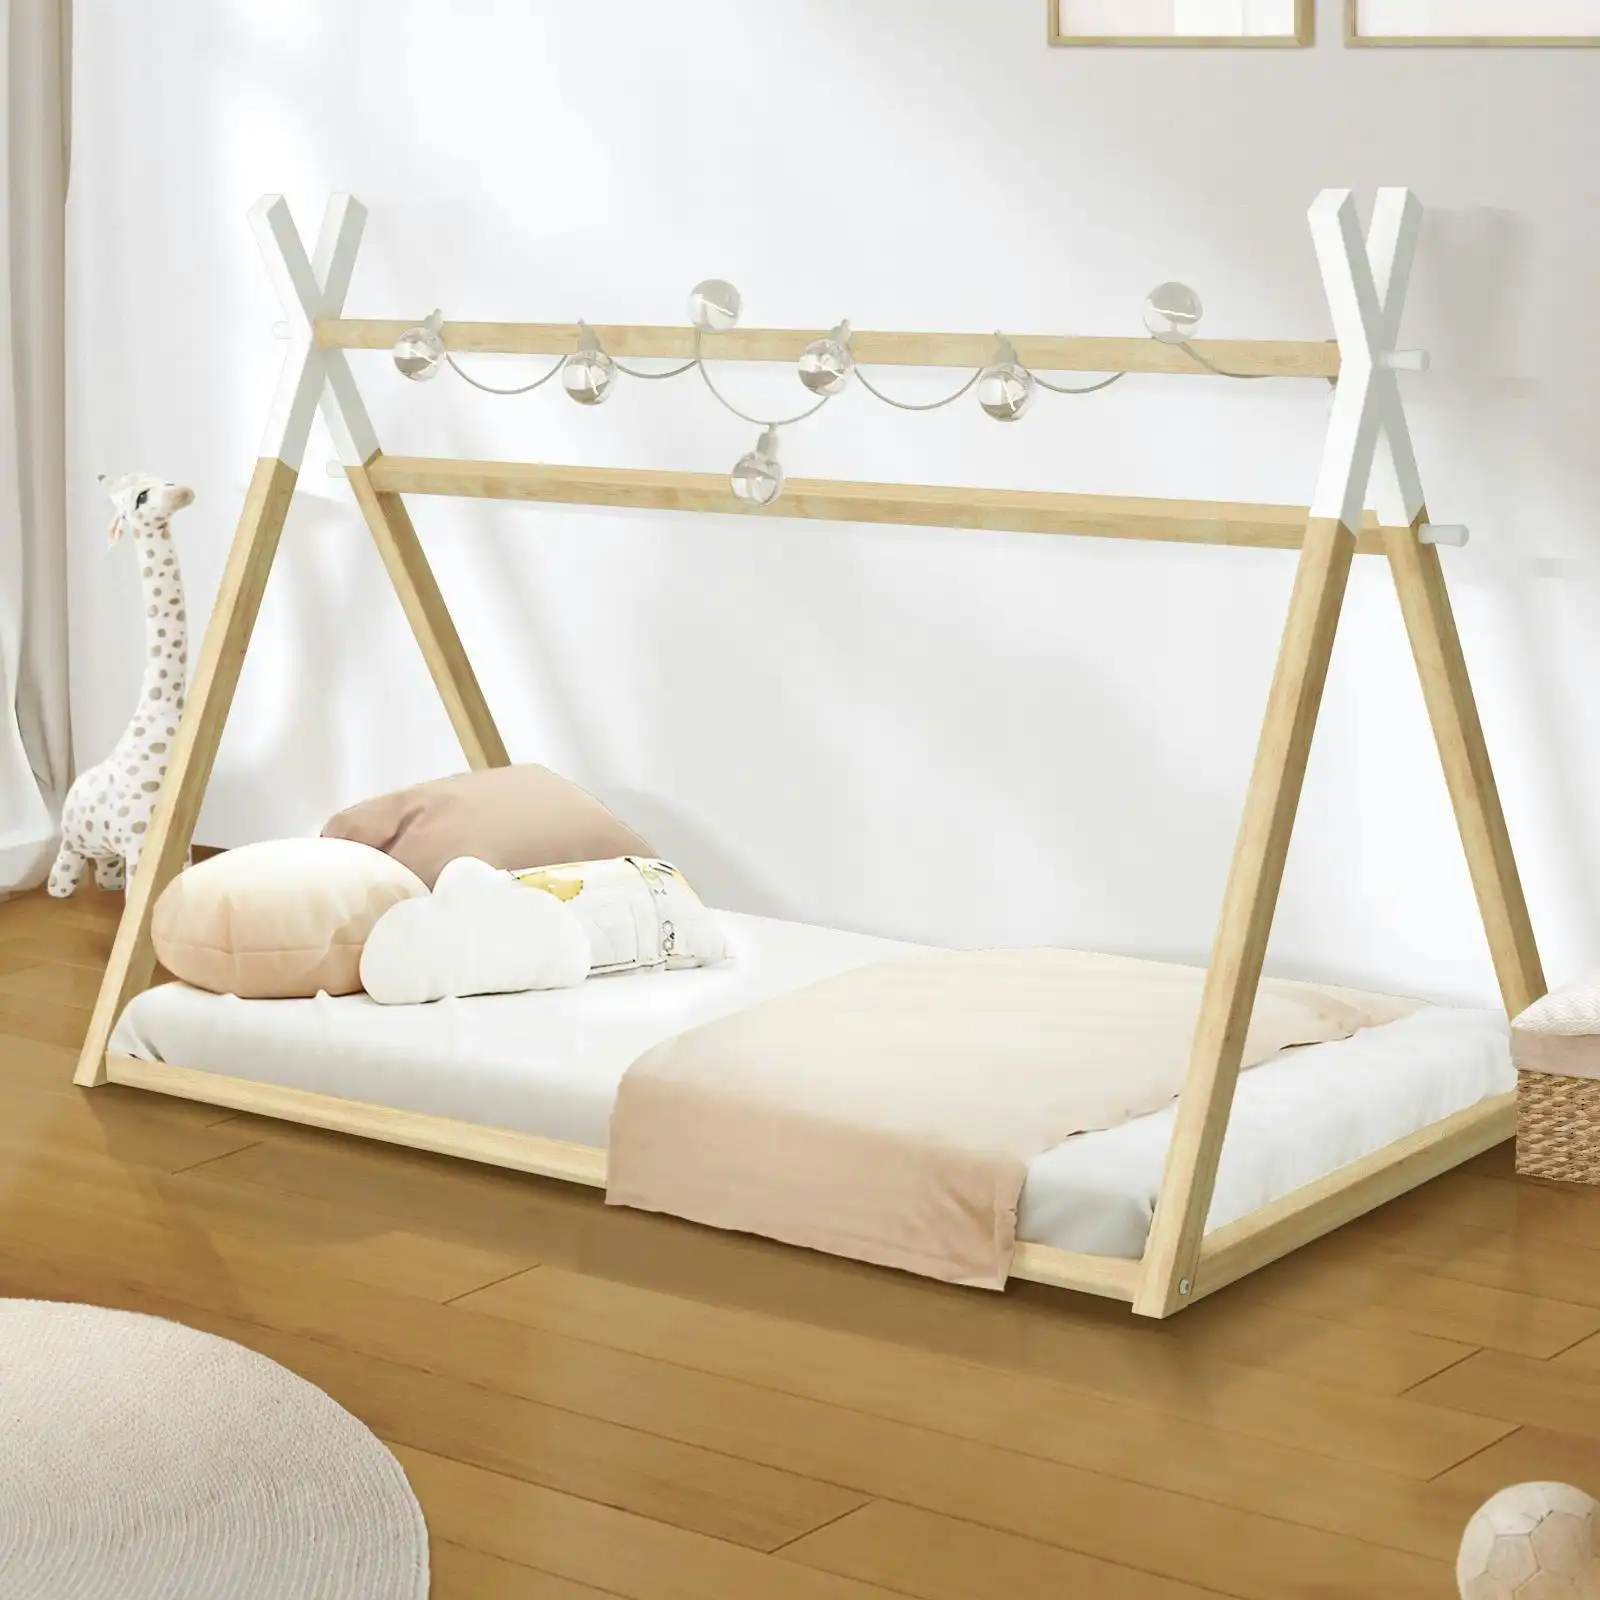 Oikiture Kids Bed Frame Wooden Timber King Single Teepee House Frame Beds